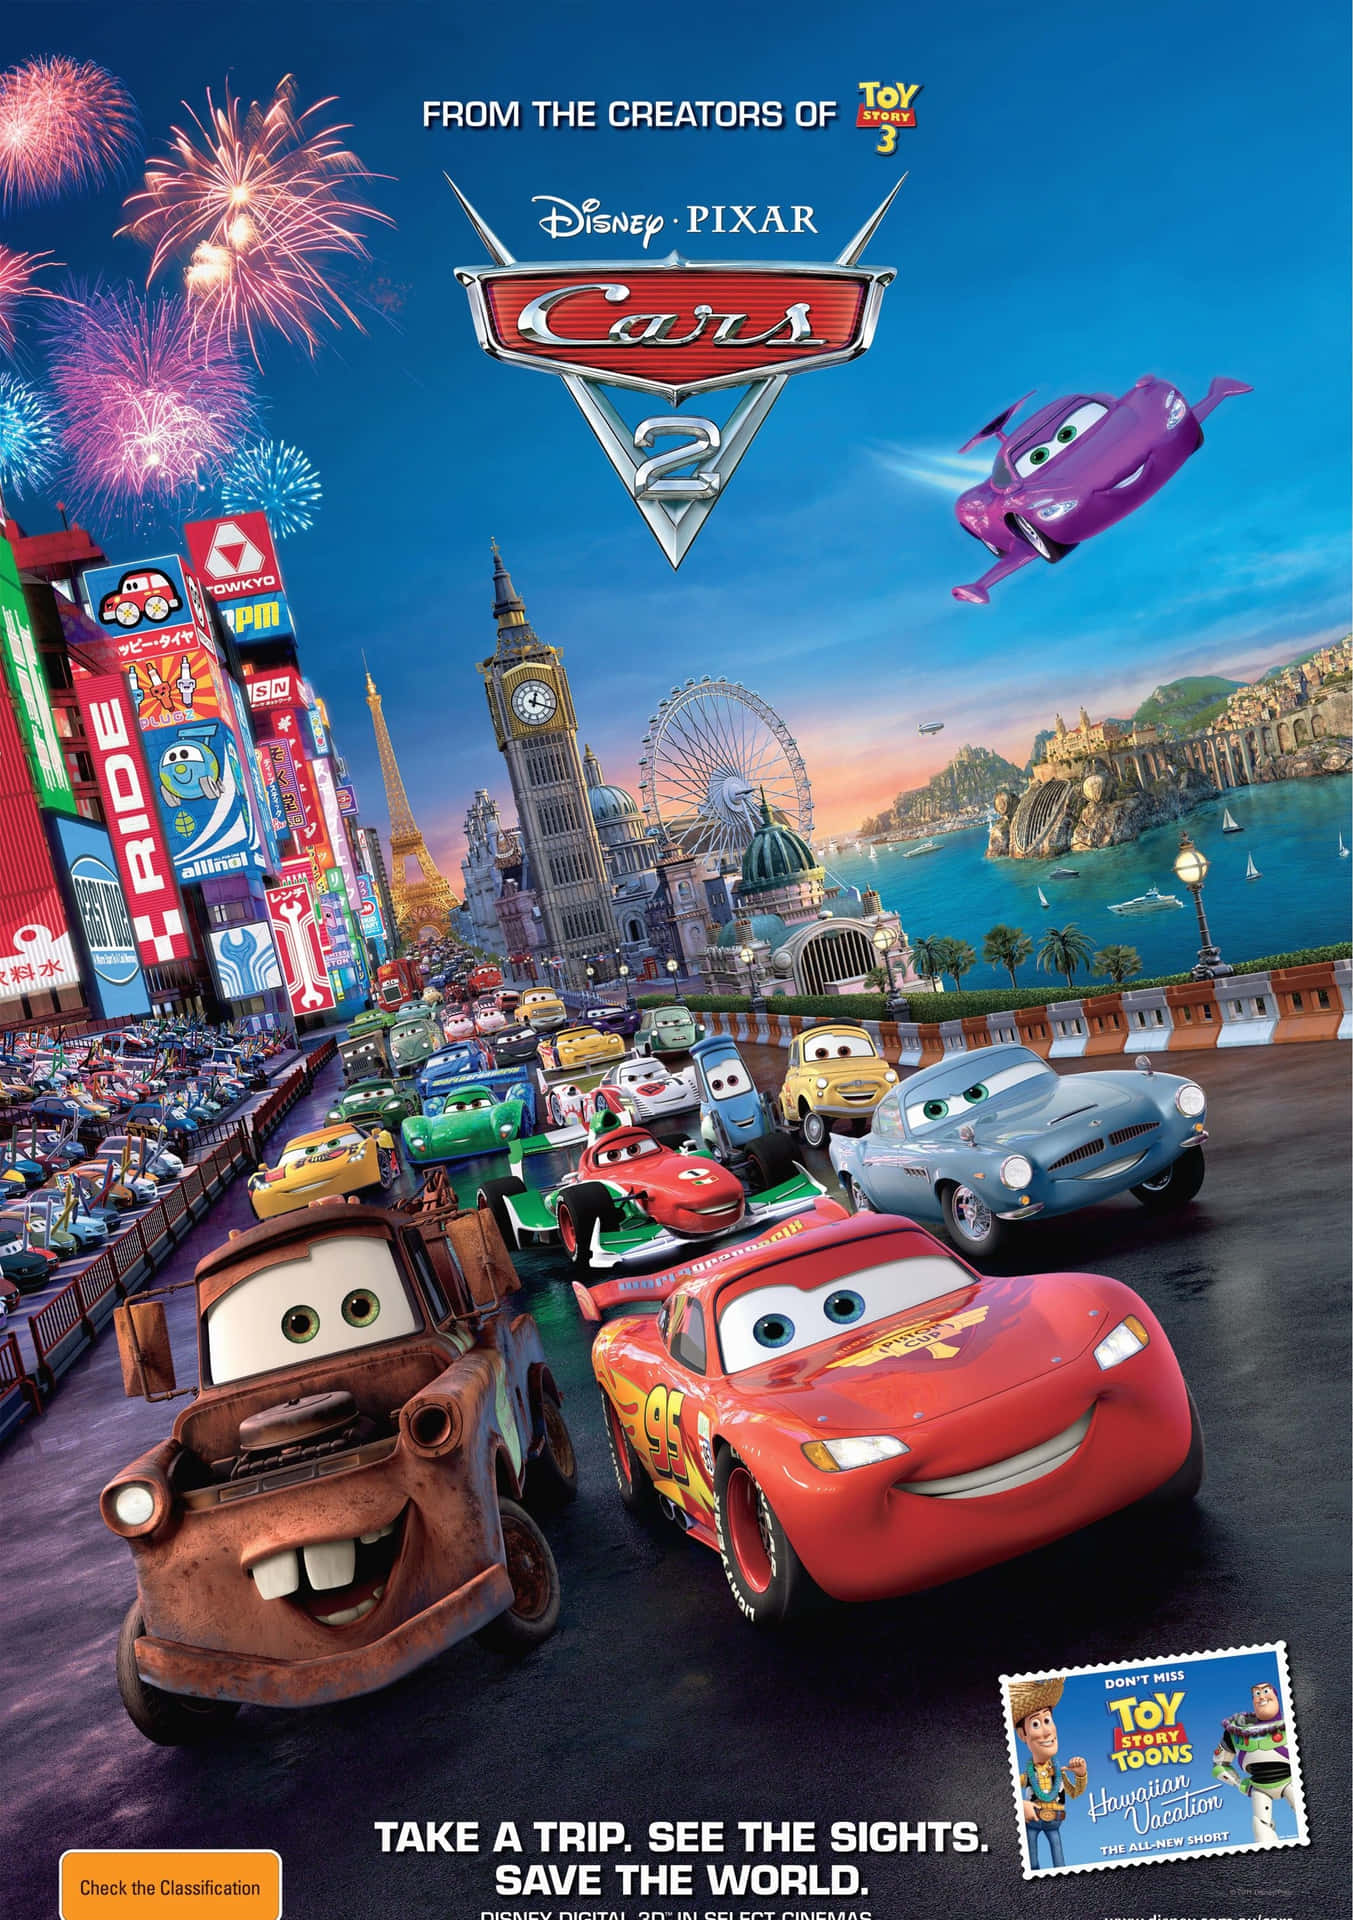 Prepare for the ultimate racing adventure in Cars 2!